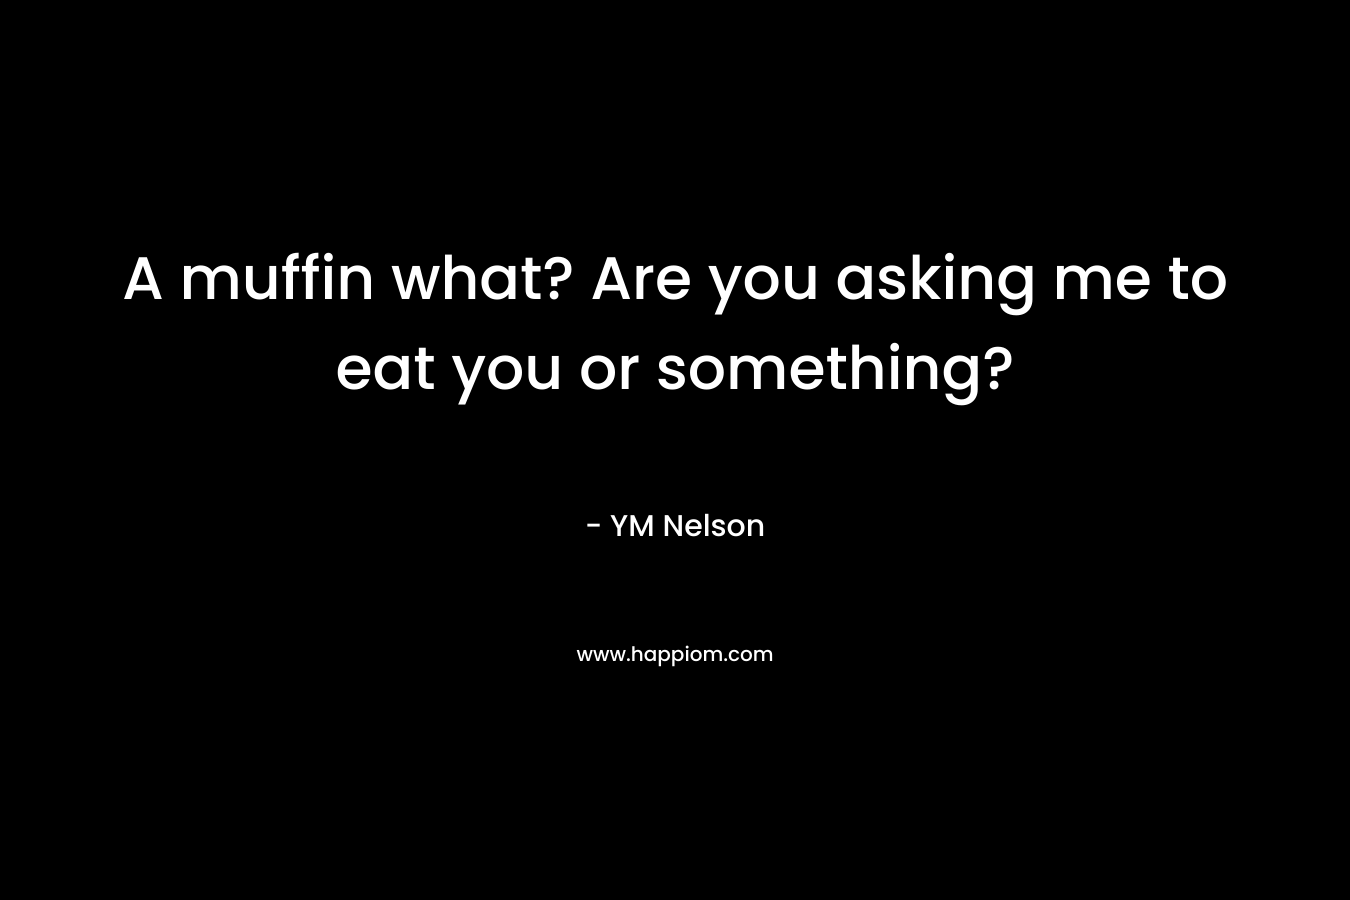 A muffin what? Are you asking me to eat you or something? – YM Nelson